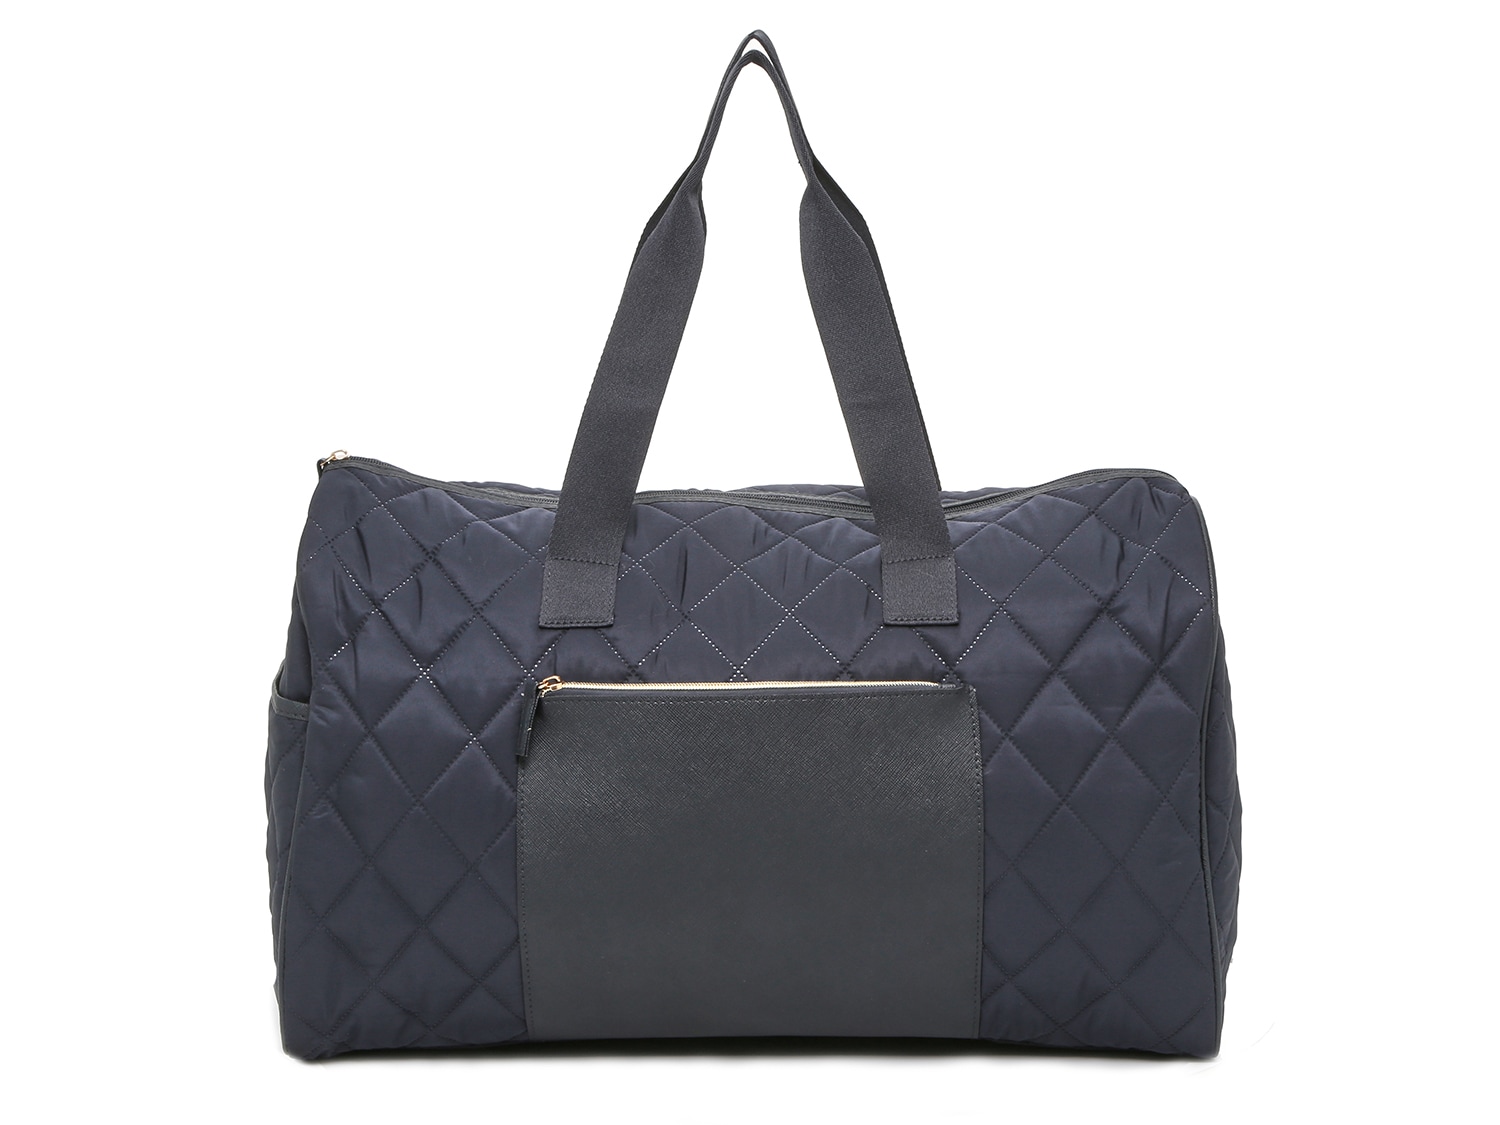 DSW Exclusive Free Quilted Weekender Bag - Free Shipping | DSW